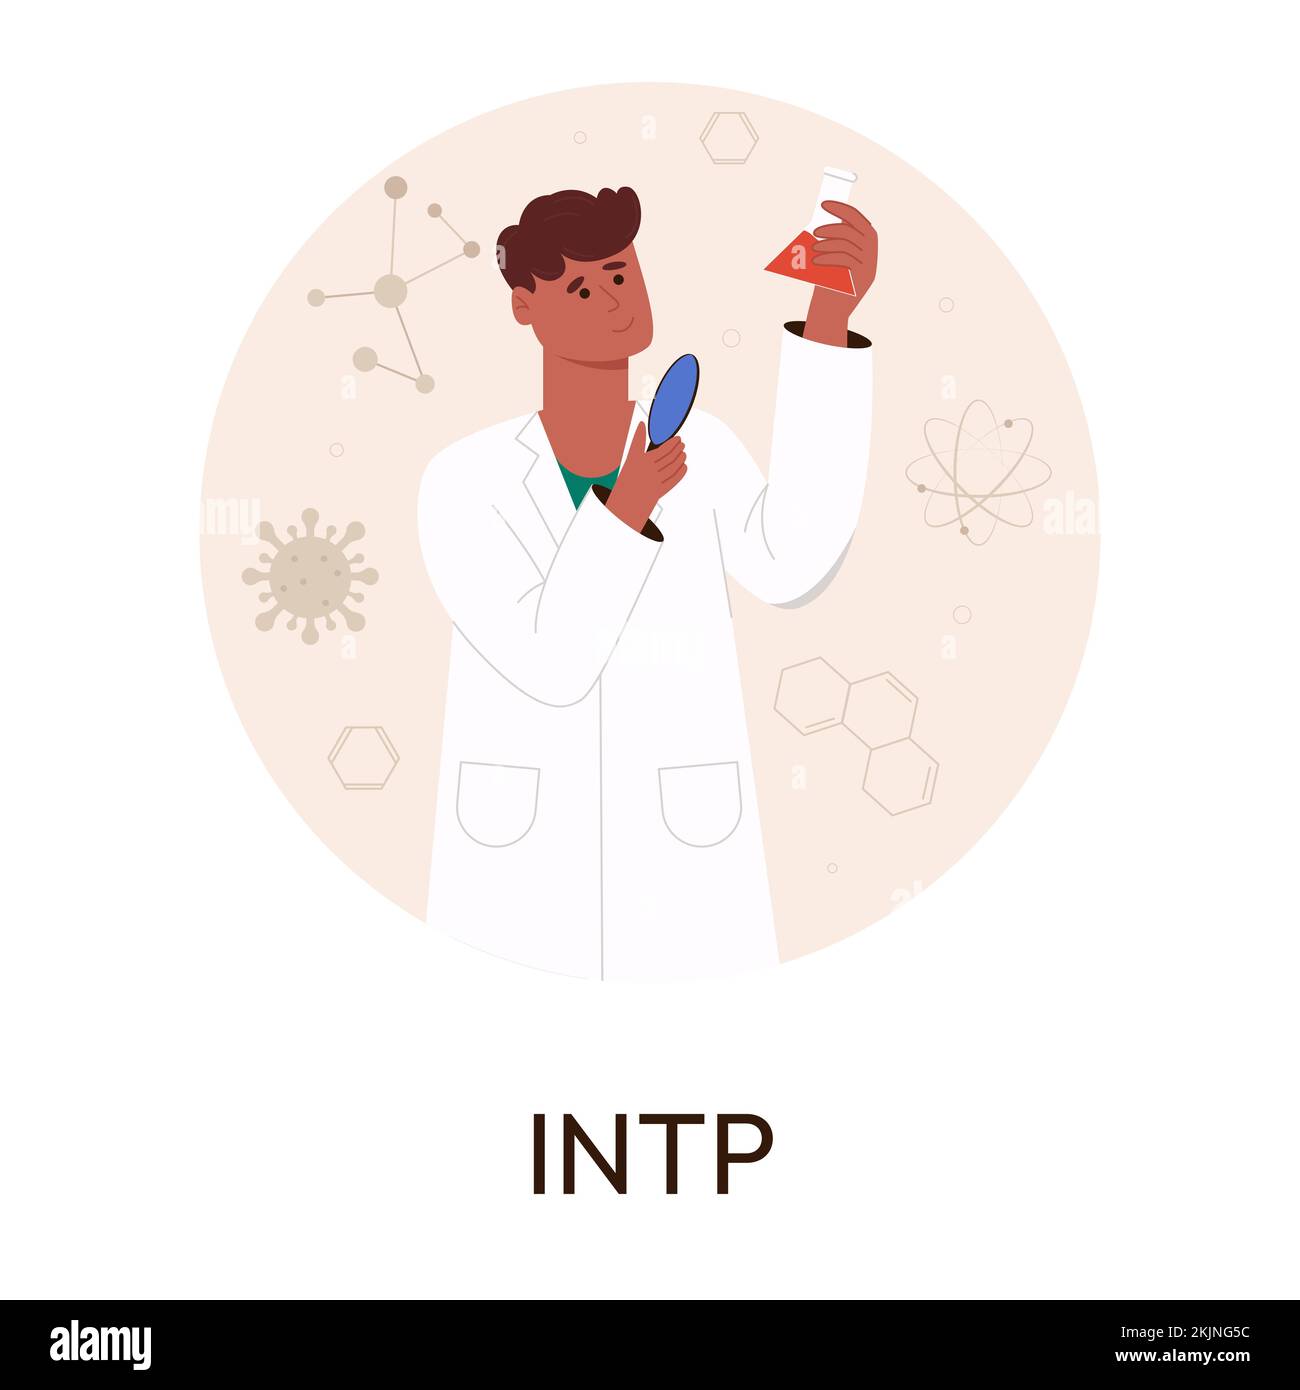 Artwork  Myers briggs personality types, Mbti, Intp